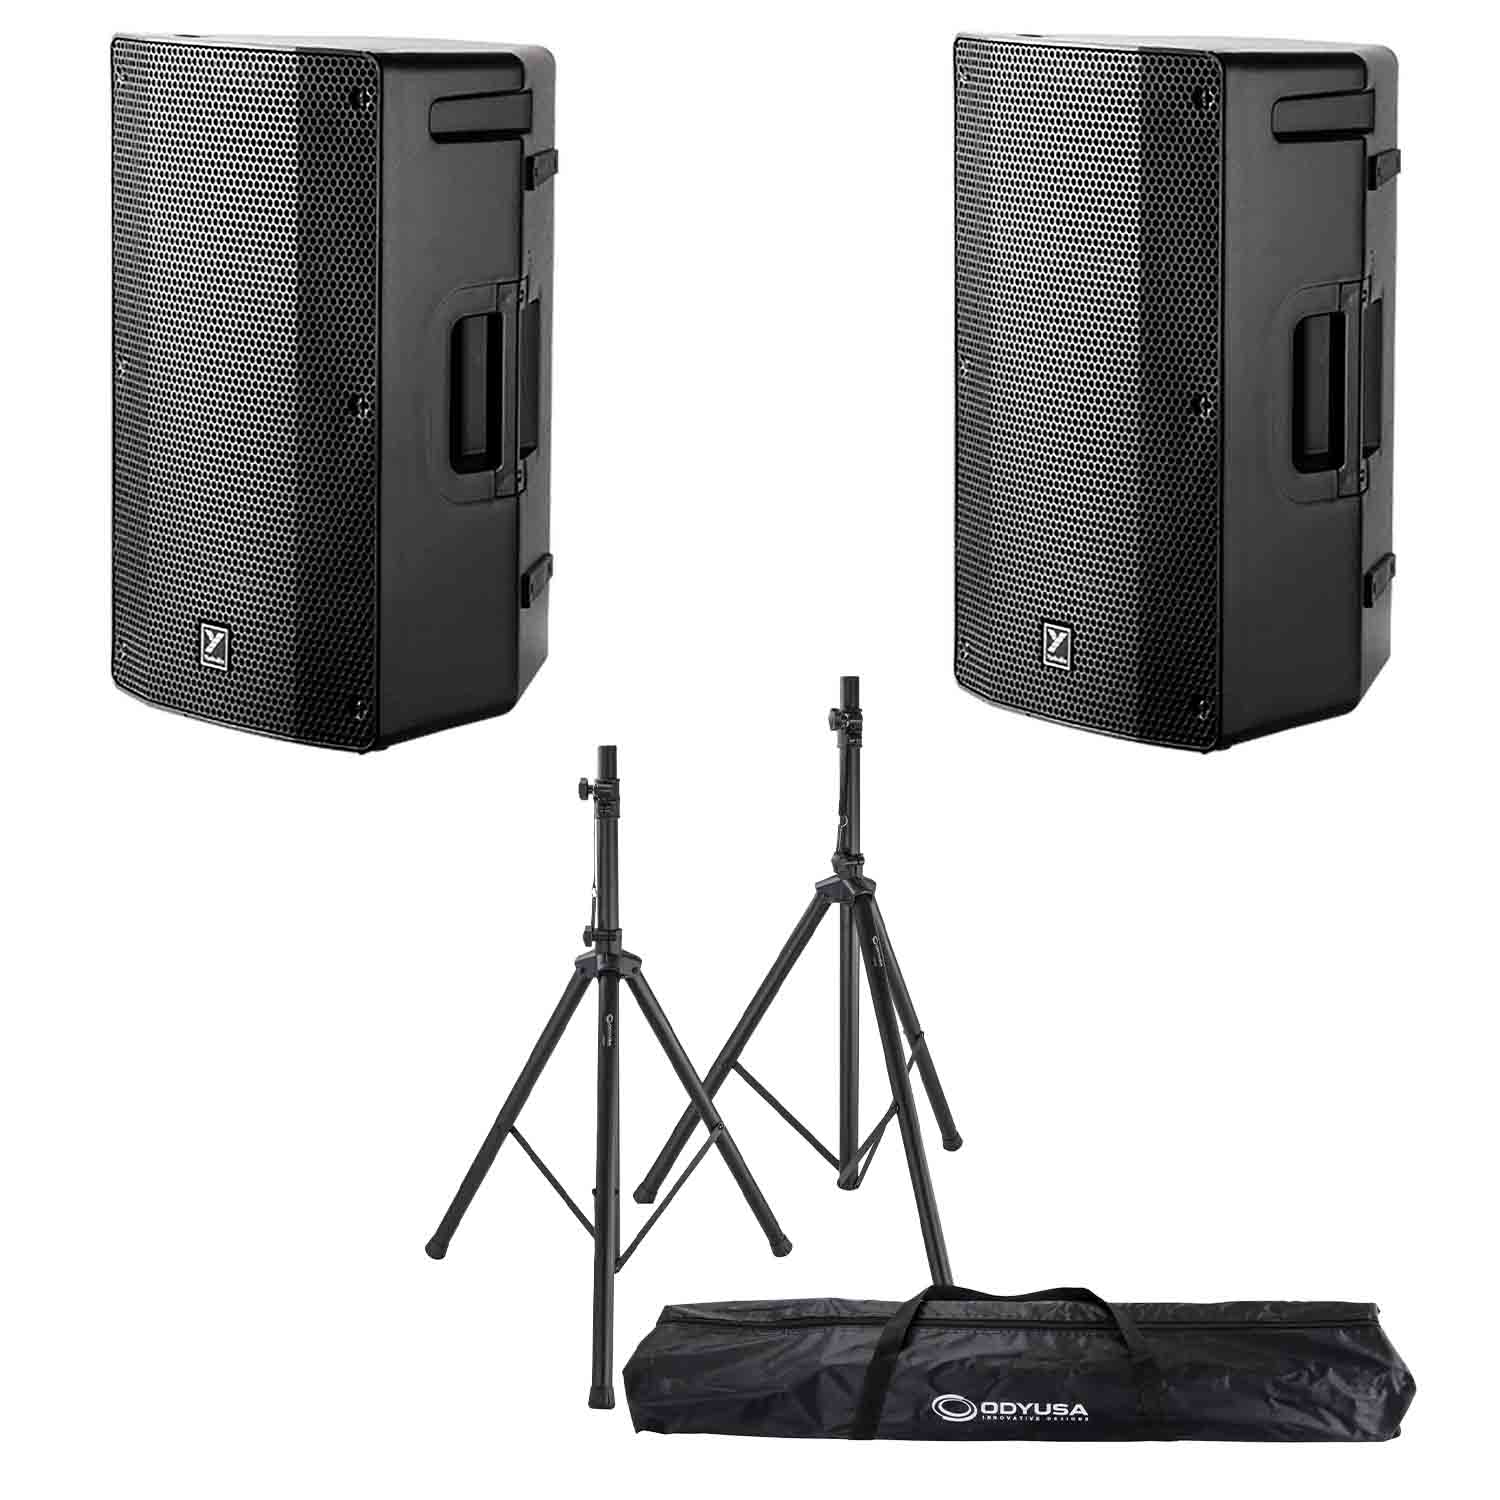 Yorkville YXL12P 12" PA Speaker Package with Stands and Bag - Hollywood DJ